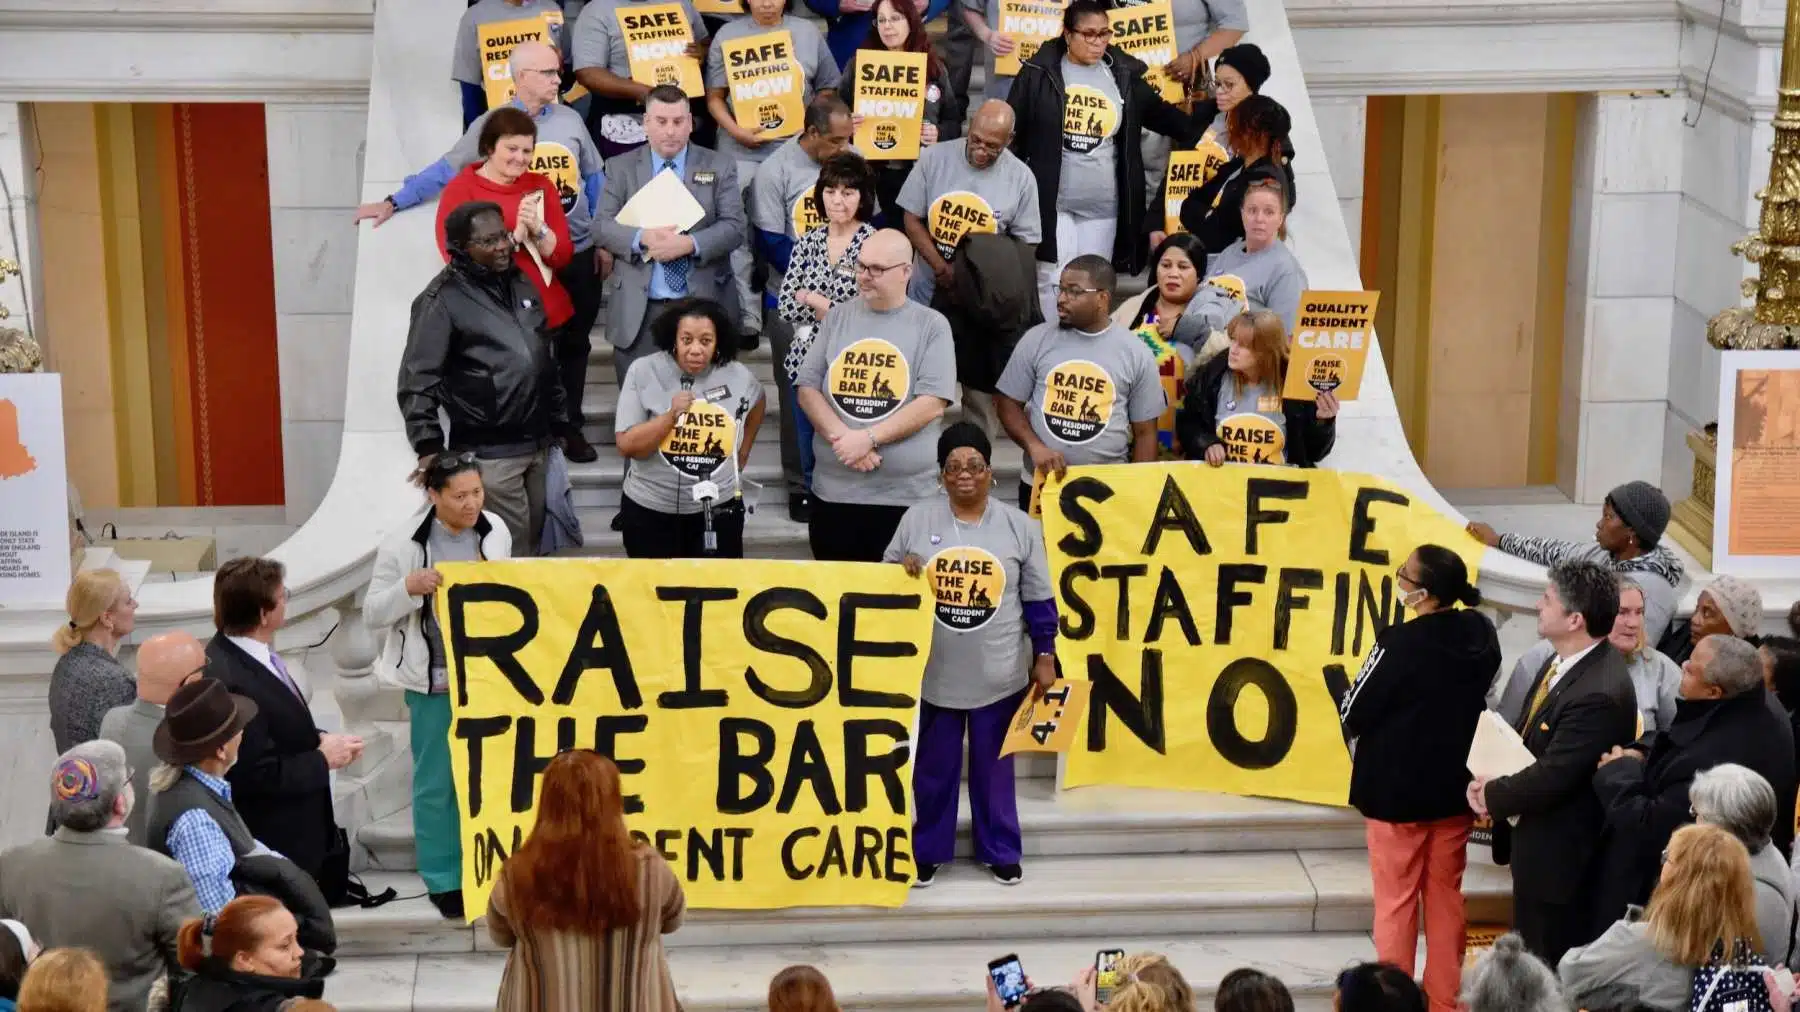 Rhode Island News: Demand an end to the lethal status quo in nursing homes